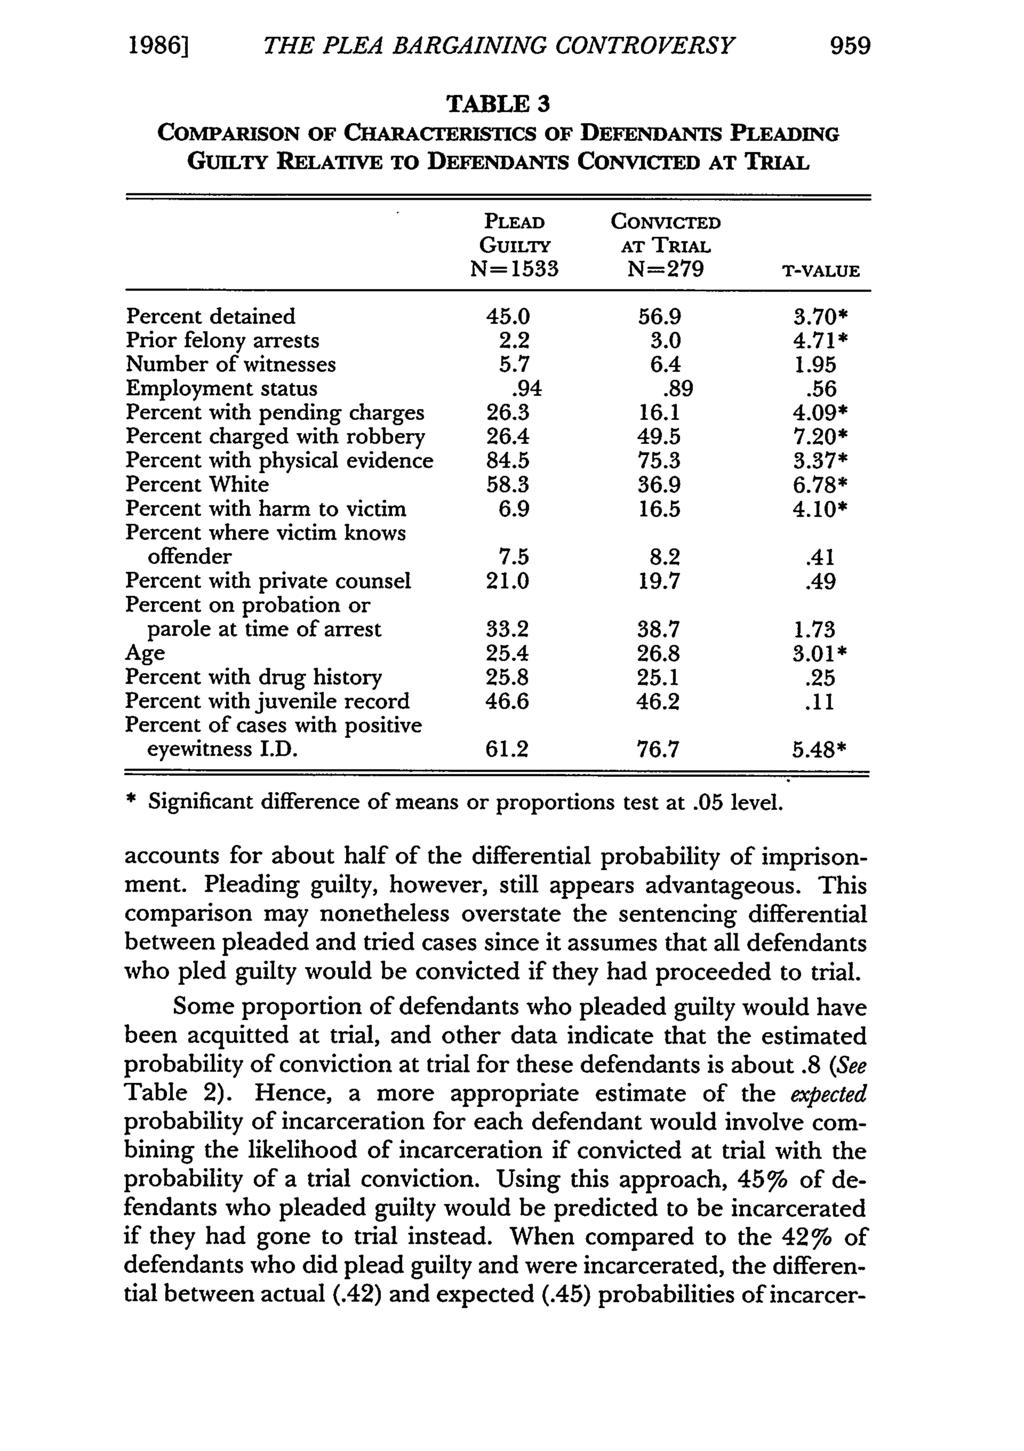 1986] THE PLEA BARGAINING CONTROVERSY 959 TABLE 3 COMPARISON OF CHARACTERISTICS OF DEFENDANTS PLEADING GuILTY RELATIVE TO DEFENDANTS CONVICTED AT TRIAL PLEAD CONVICTED AT TRIAL GuILTY N= 1533 N=279